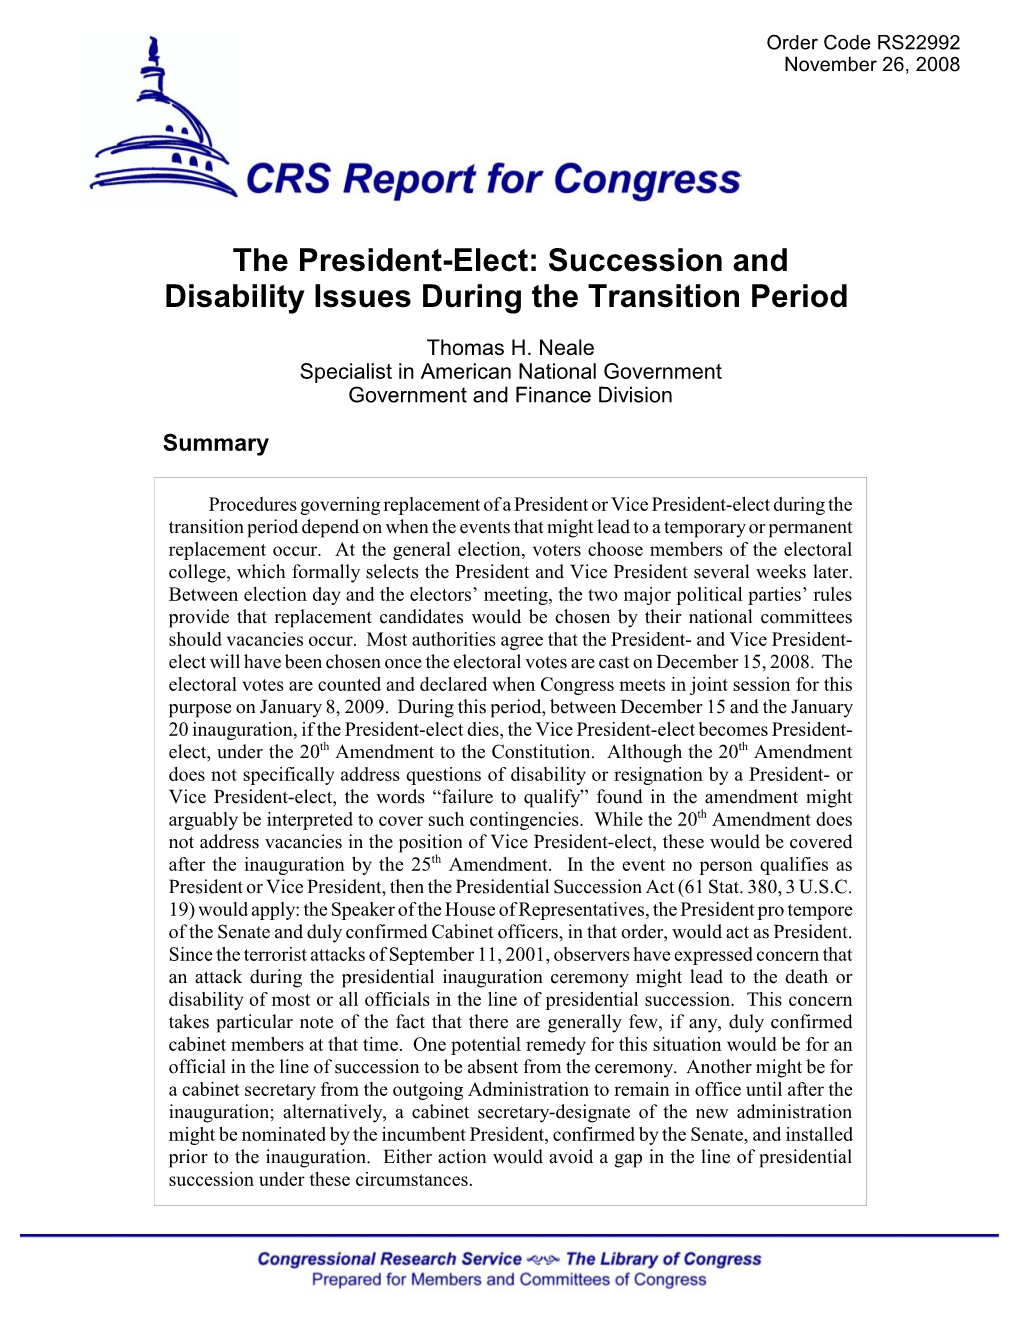 The President-Elect: Succession and Disability Issues During the Transition Period